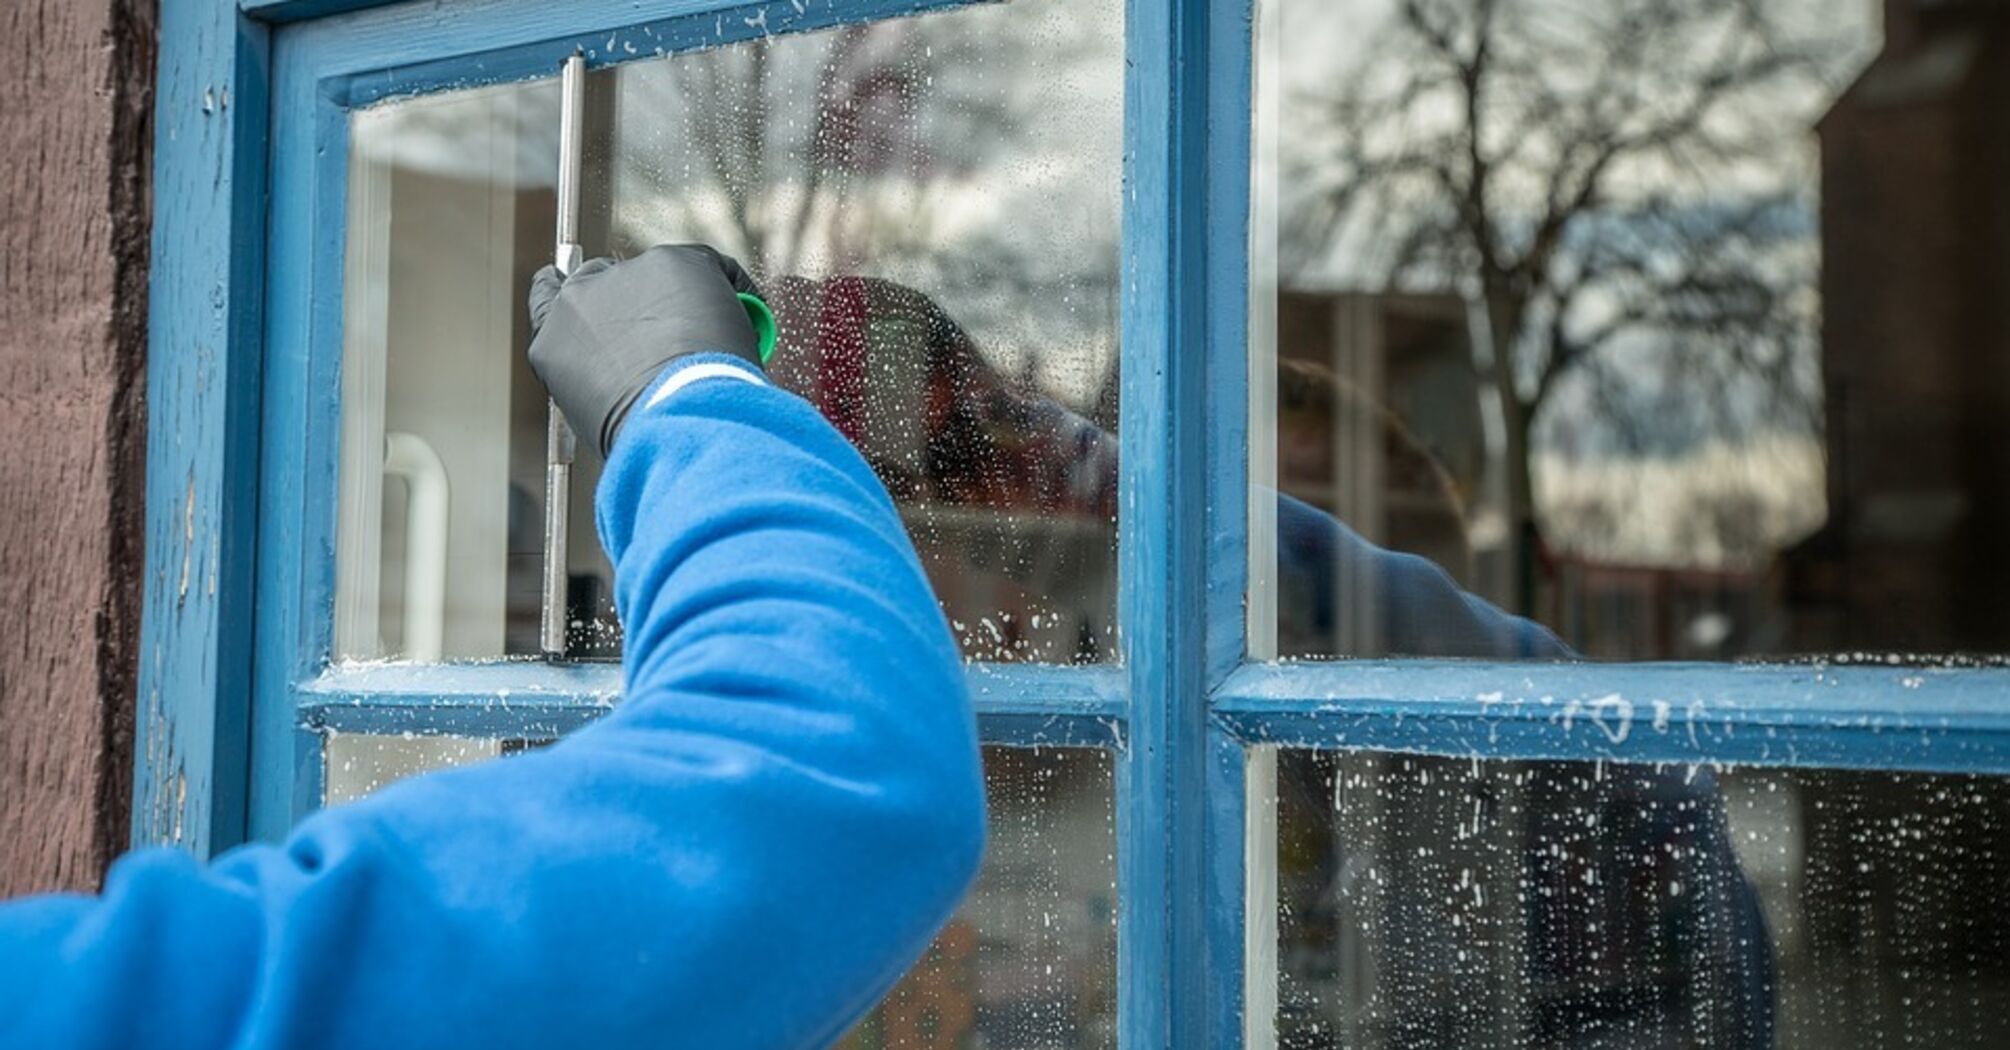 How to clean glass after winter